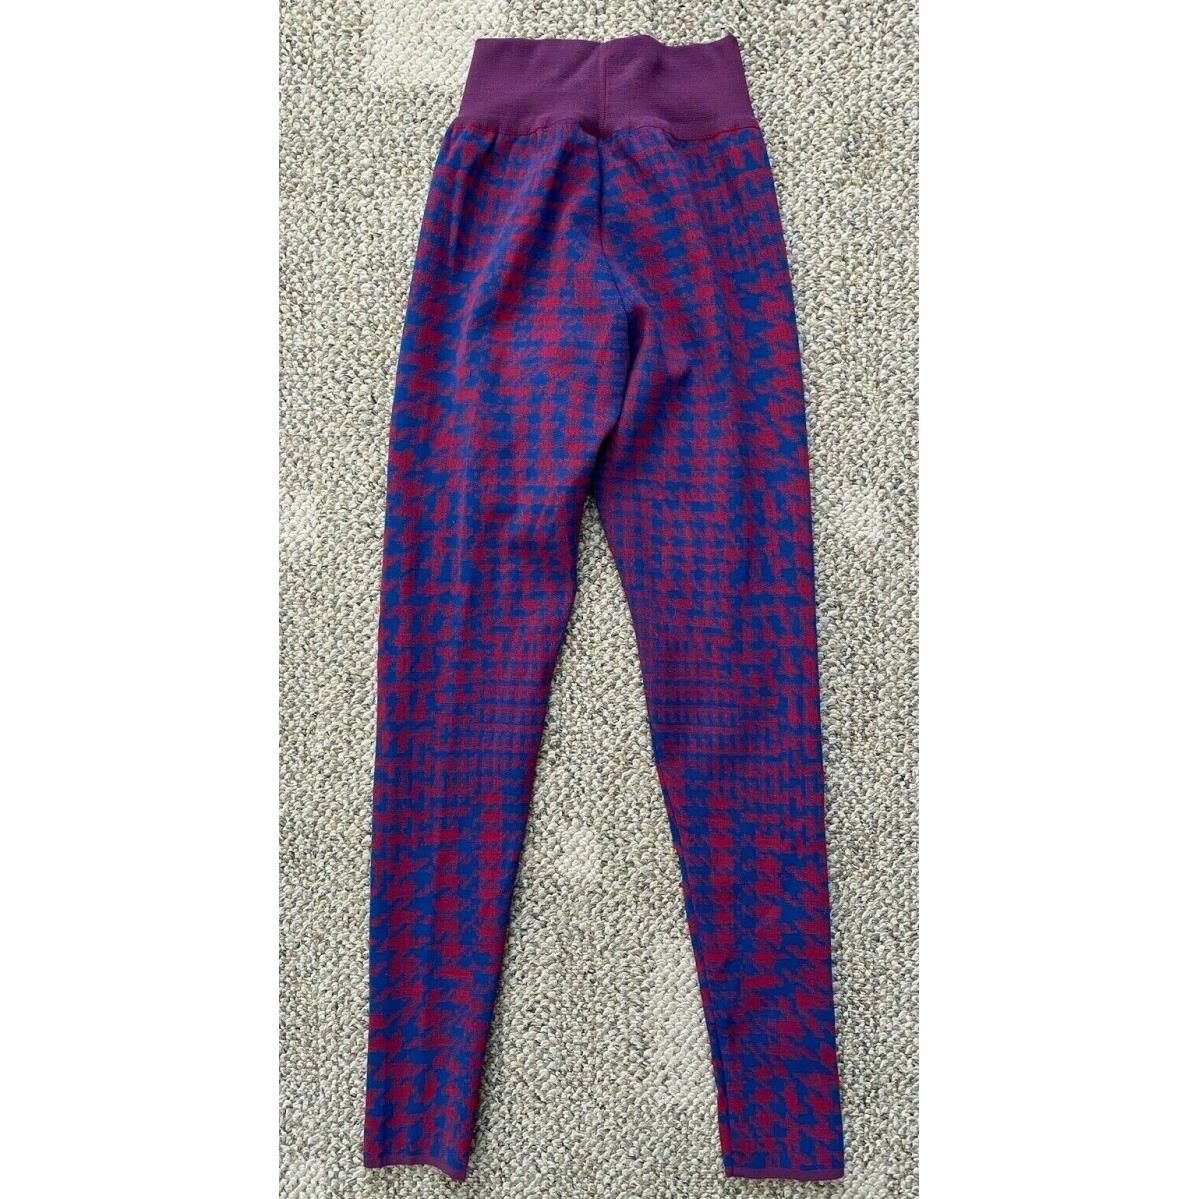 Nike Womens High Waisted Knit Leggings Pant Red/blue Print Medium Made in Italy